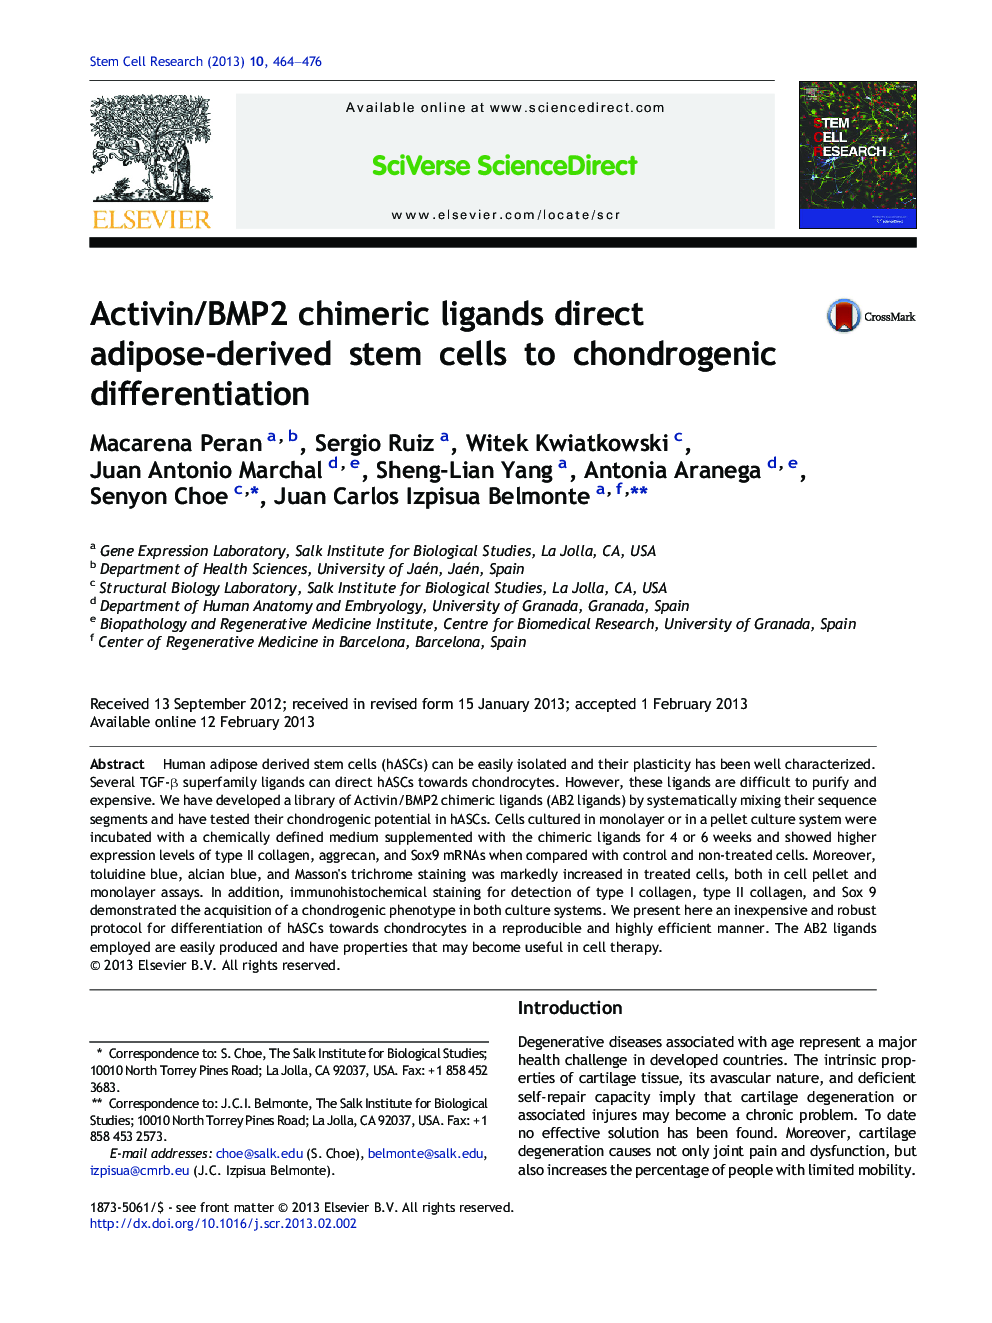 Activin/BMP2 chimeric ligands direct adipose-derived stem cells to chondrogenic differentiation